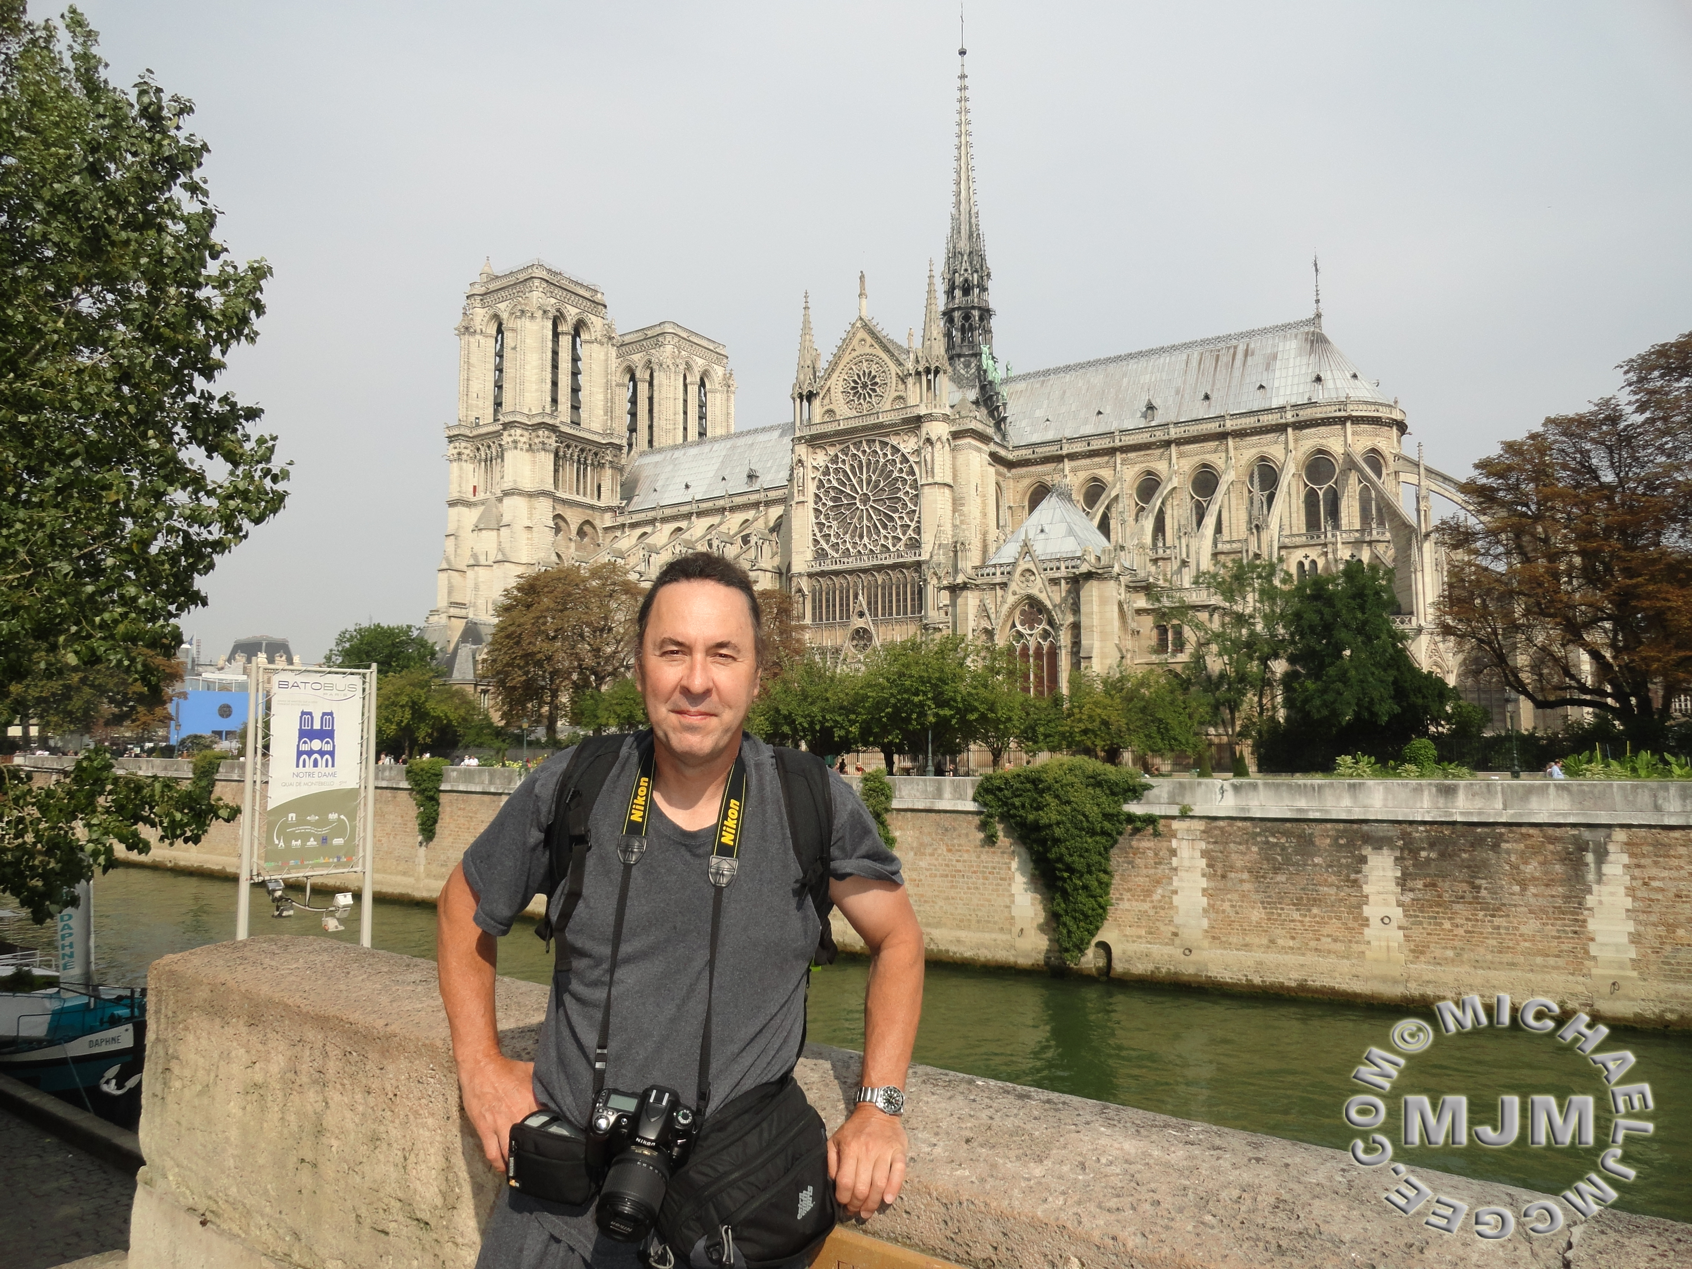 Cathedrale Notre Dame / michaeljmcgee.com